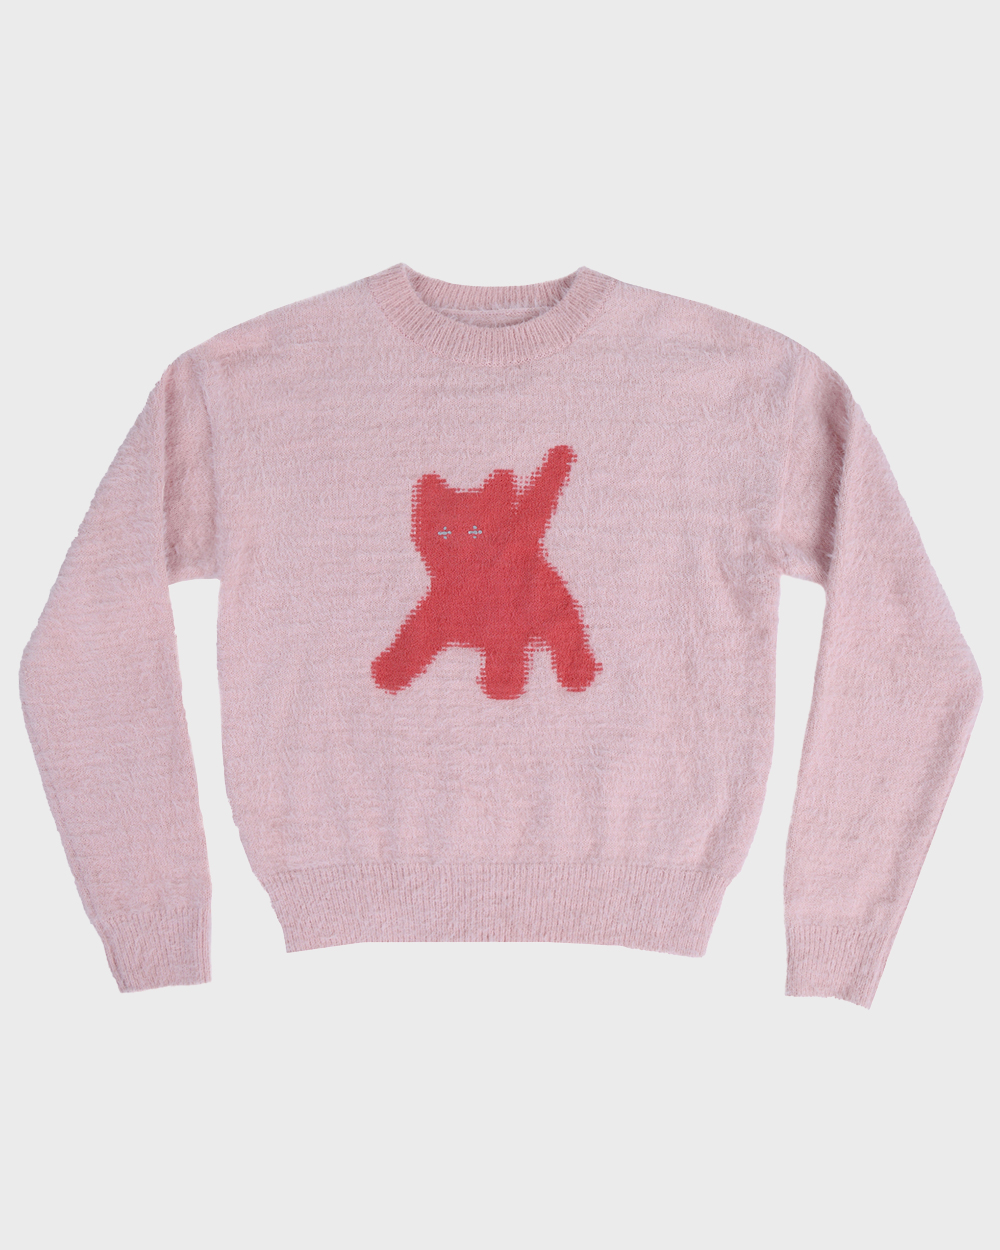 aeae Flashed cats angora knit_Loosed (Pink) *10/4 발송 예정*